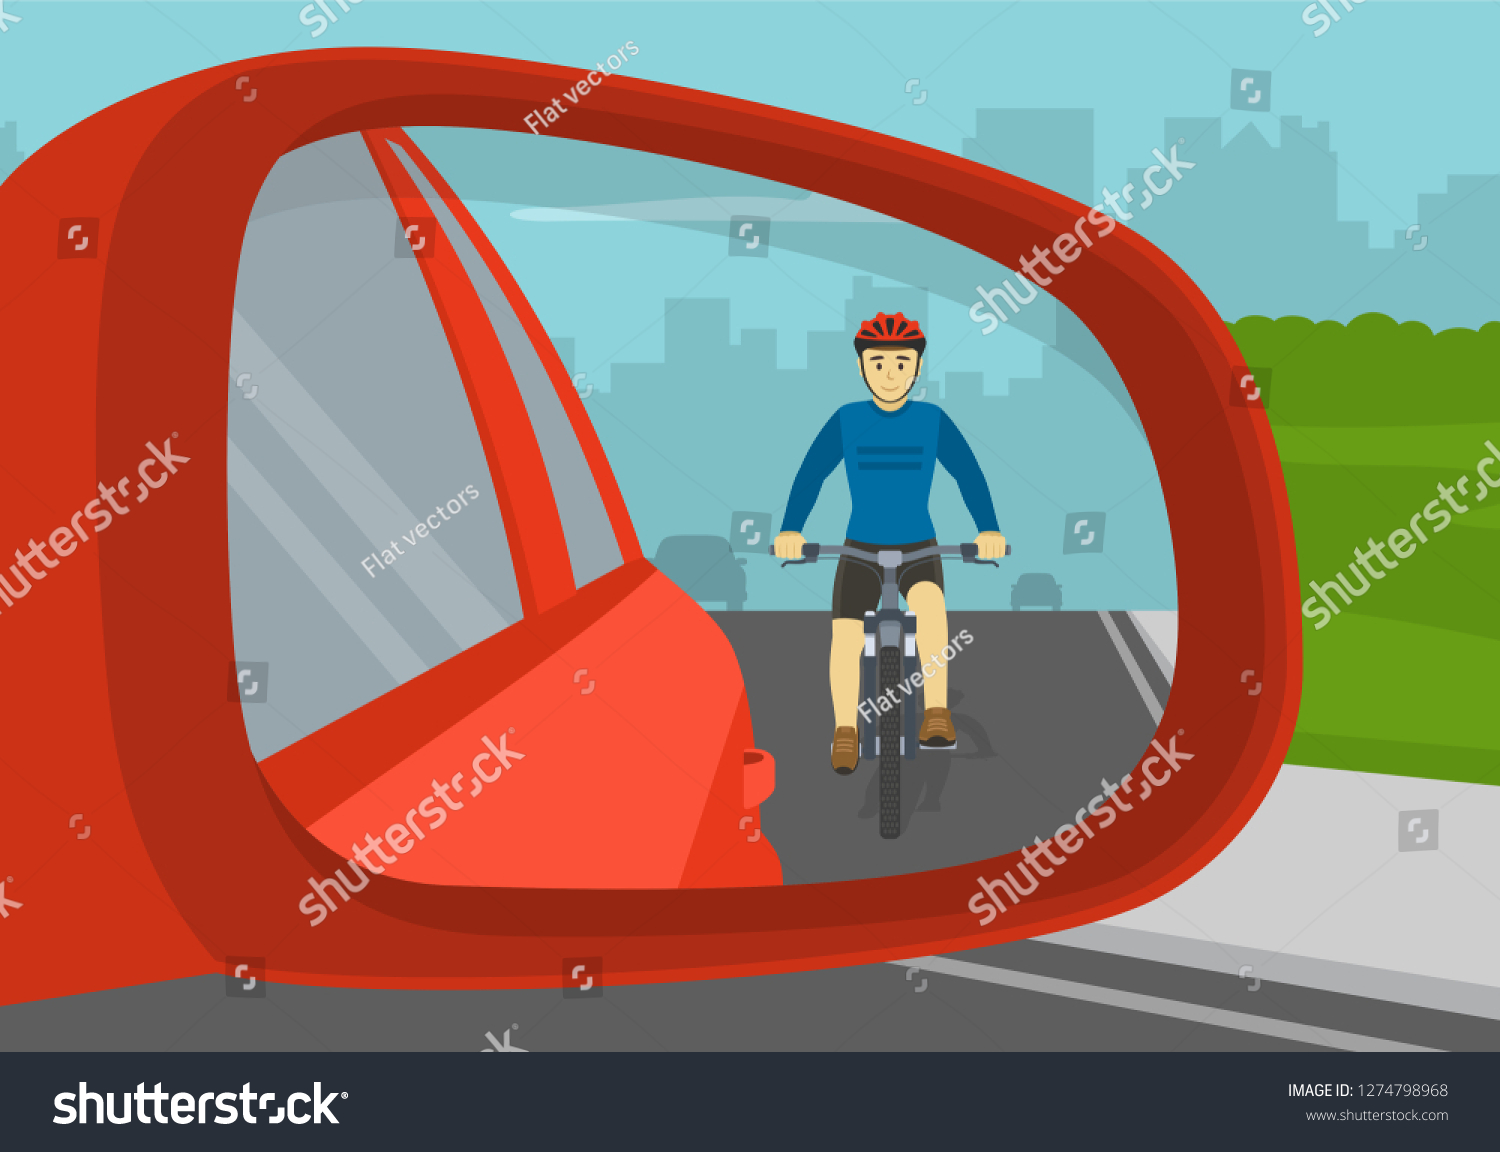 bicycle wing mirror